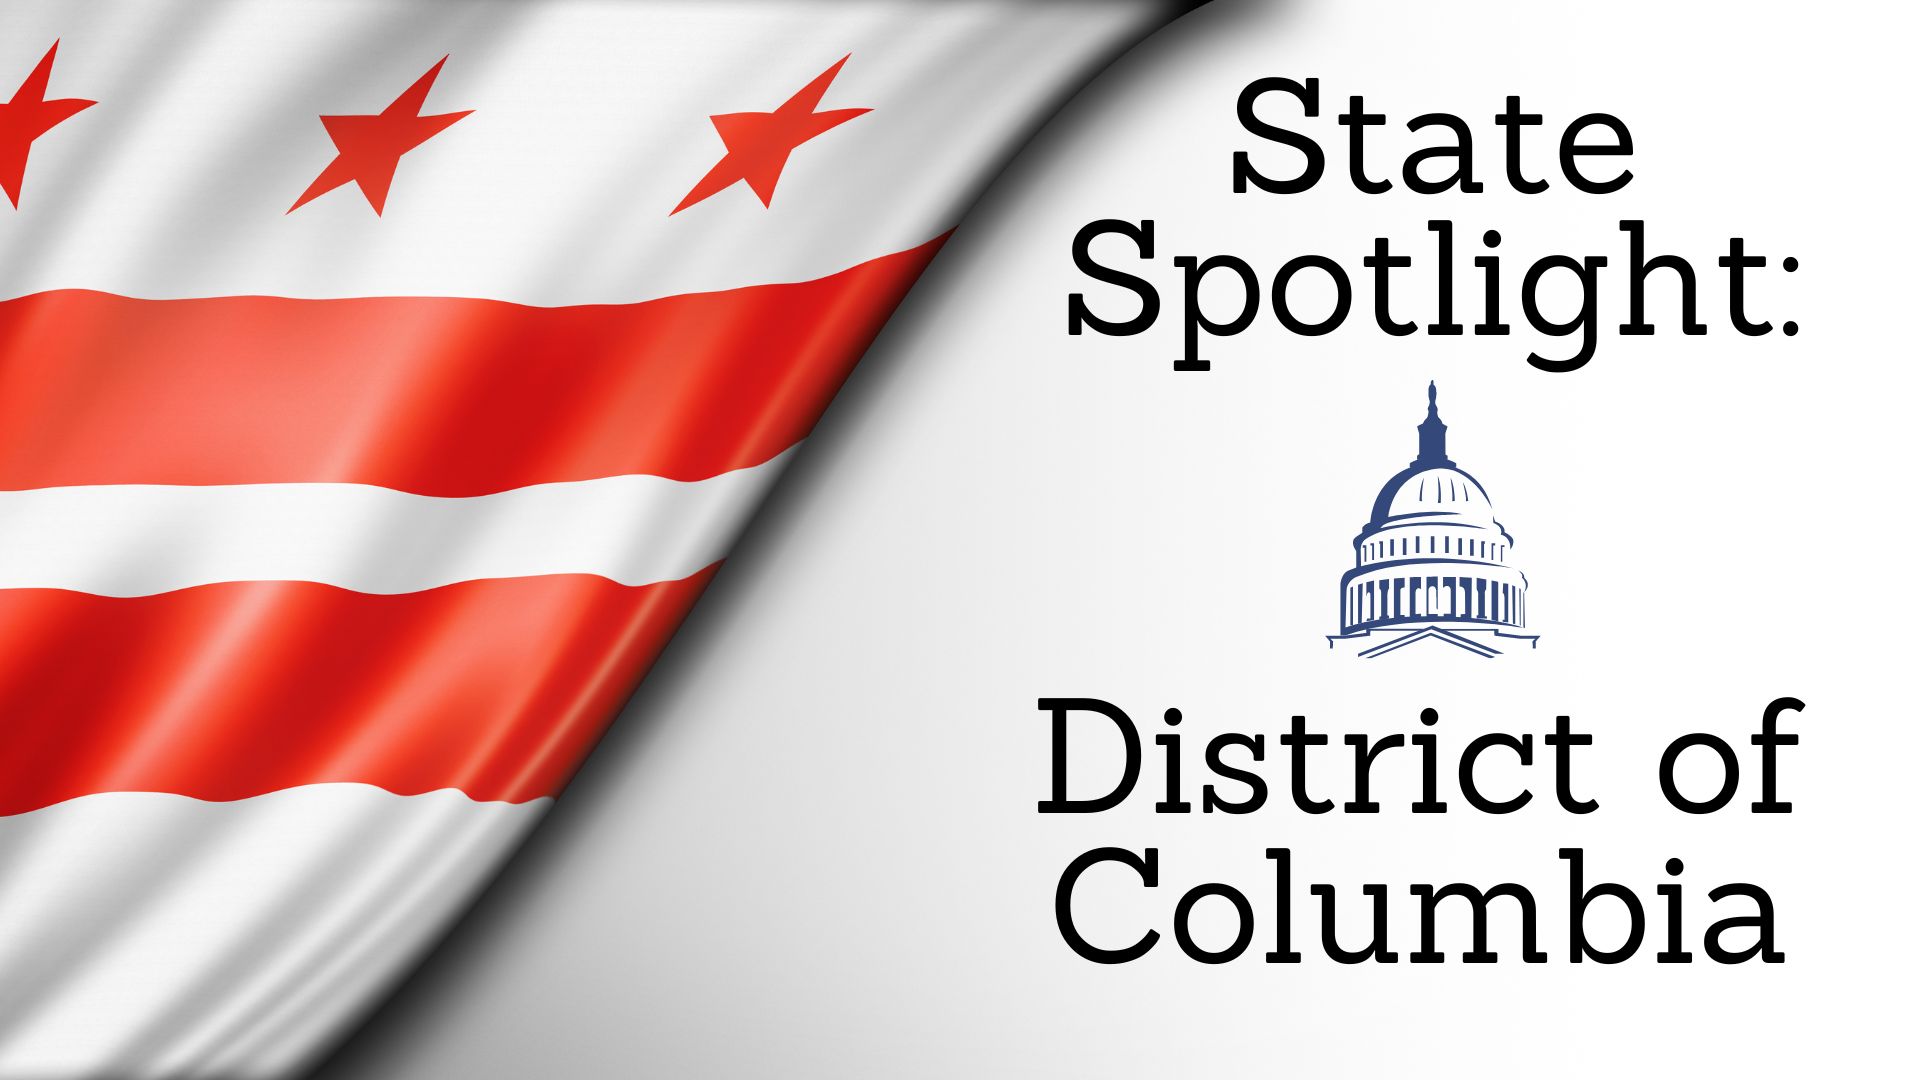 State Spotlight: District of Columbia